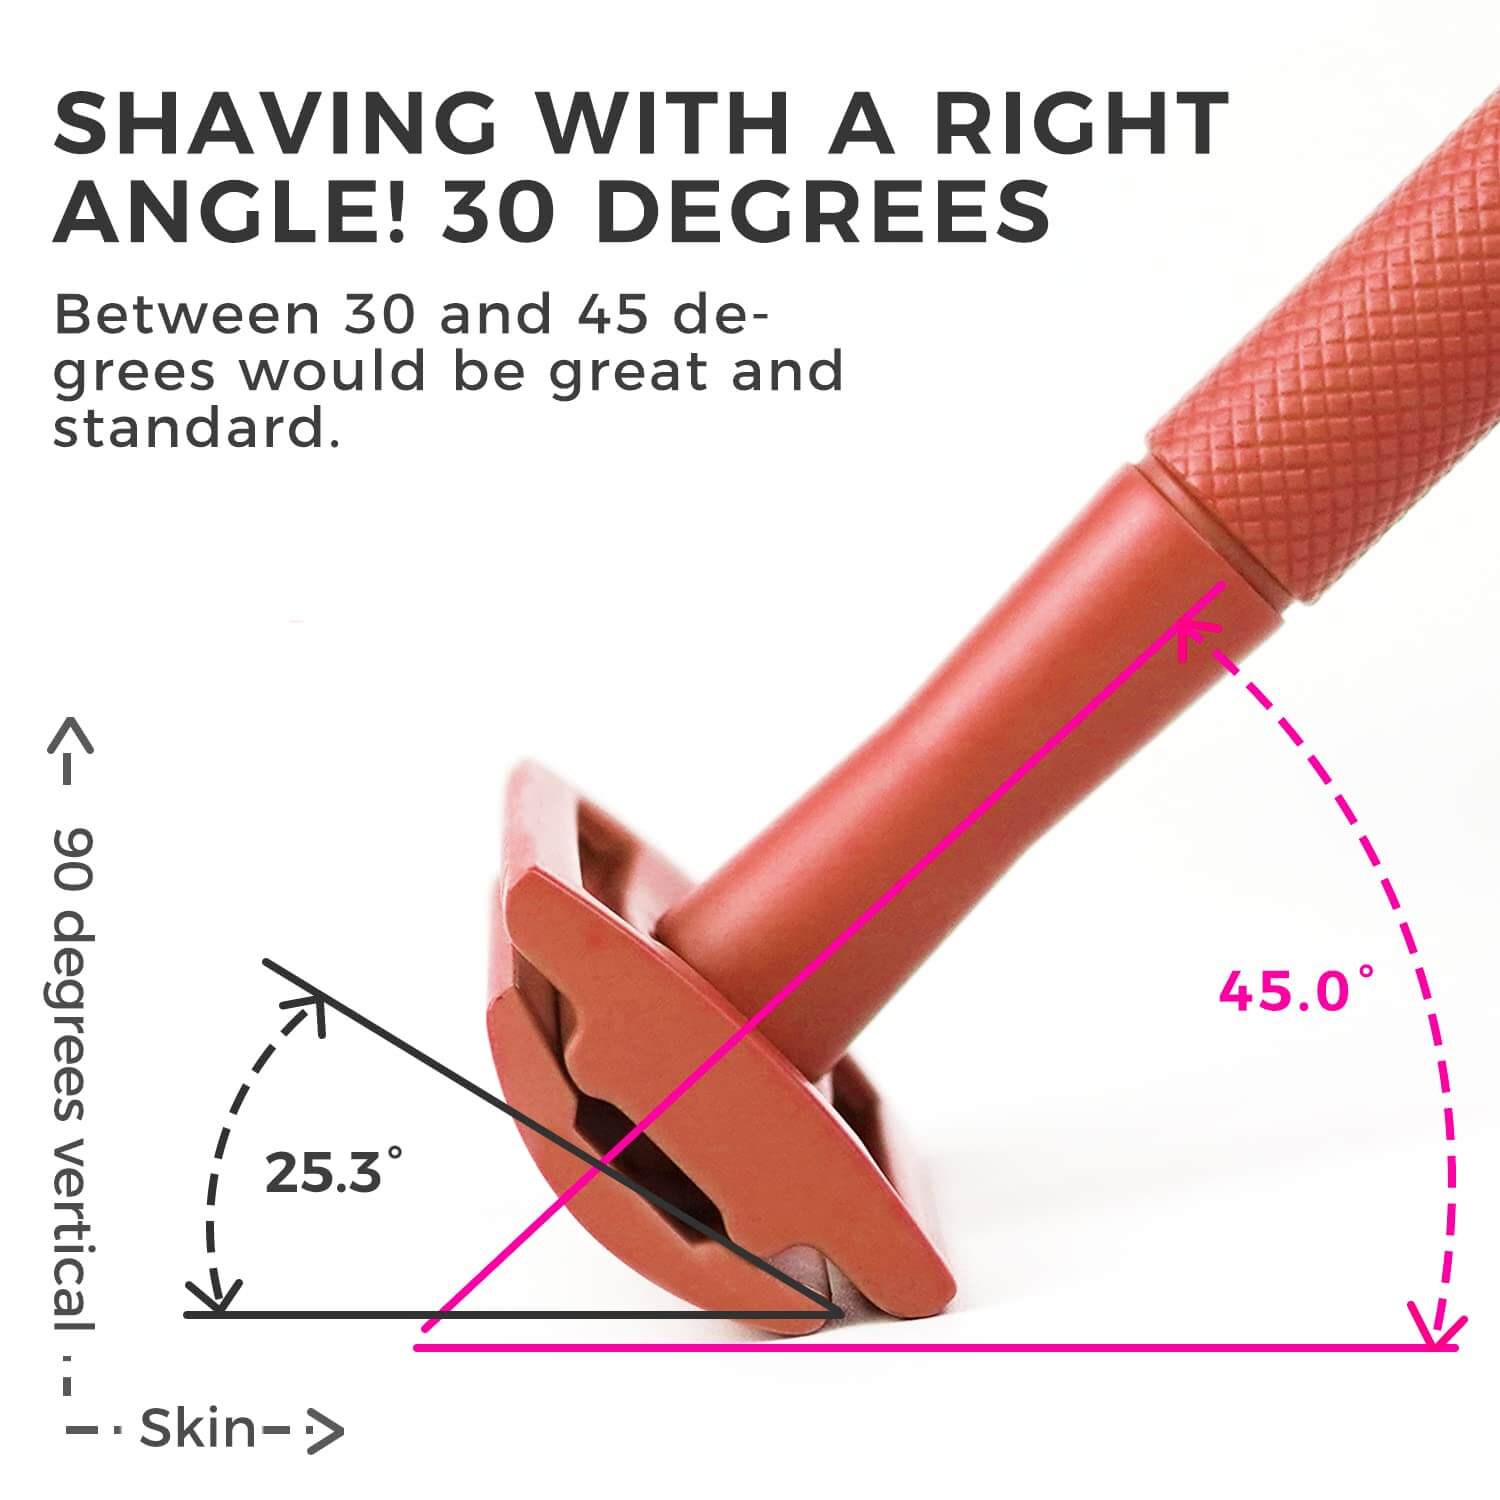 Shaving Between 30 And 45 Degrees Would Be Great And Standard With Use Zomchi Red Safety Razor